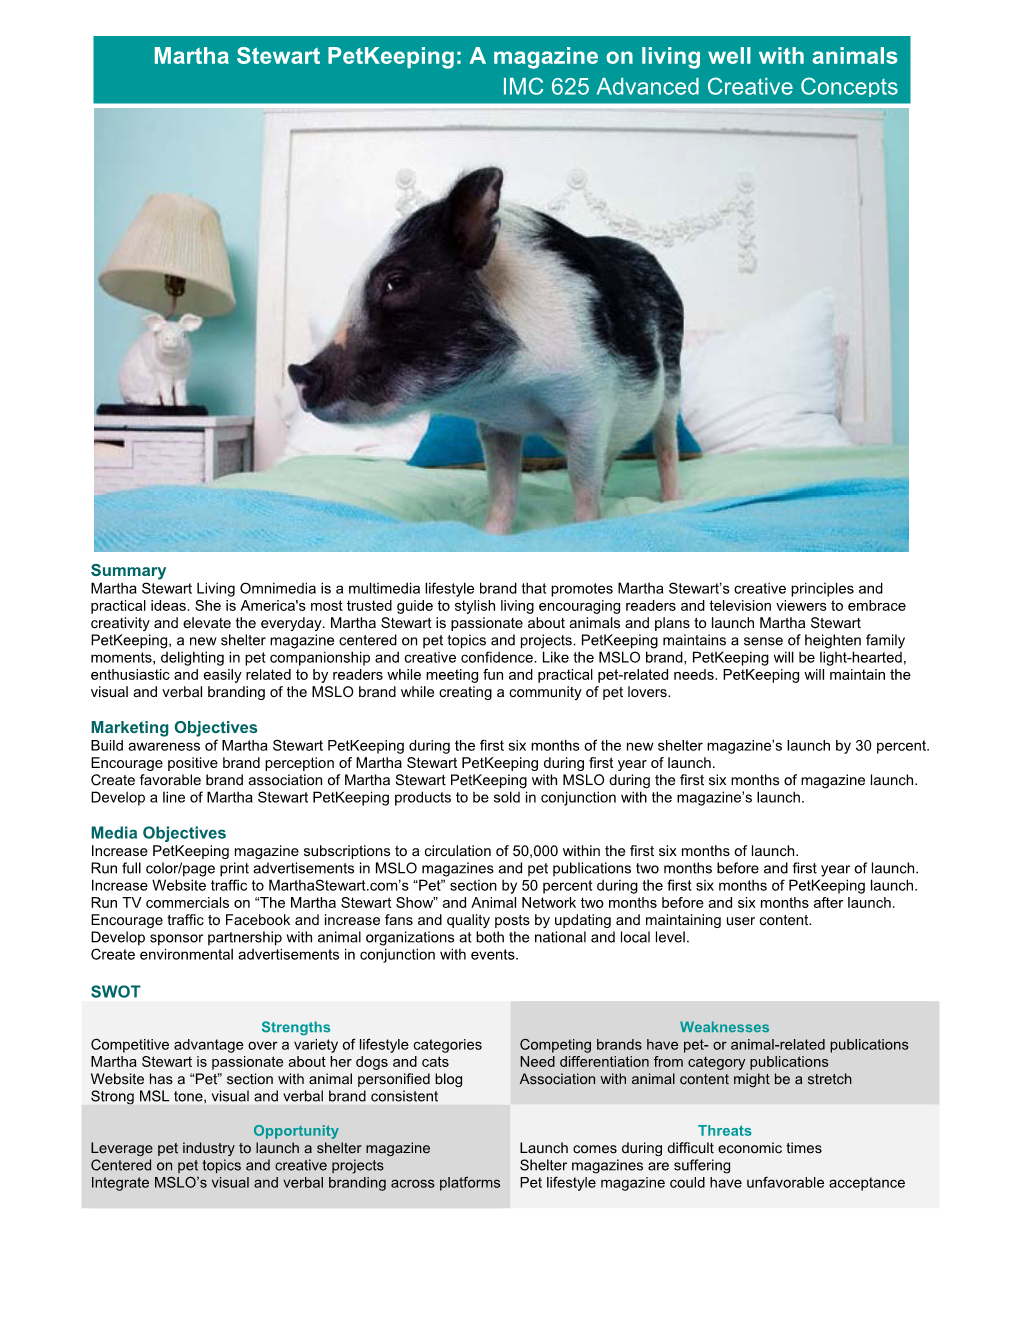 Martha Stewart Petkeeping: a Magazine on Living Well with Animals IMC 625 Advanced Creative Concepts